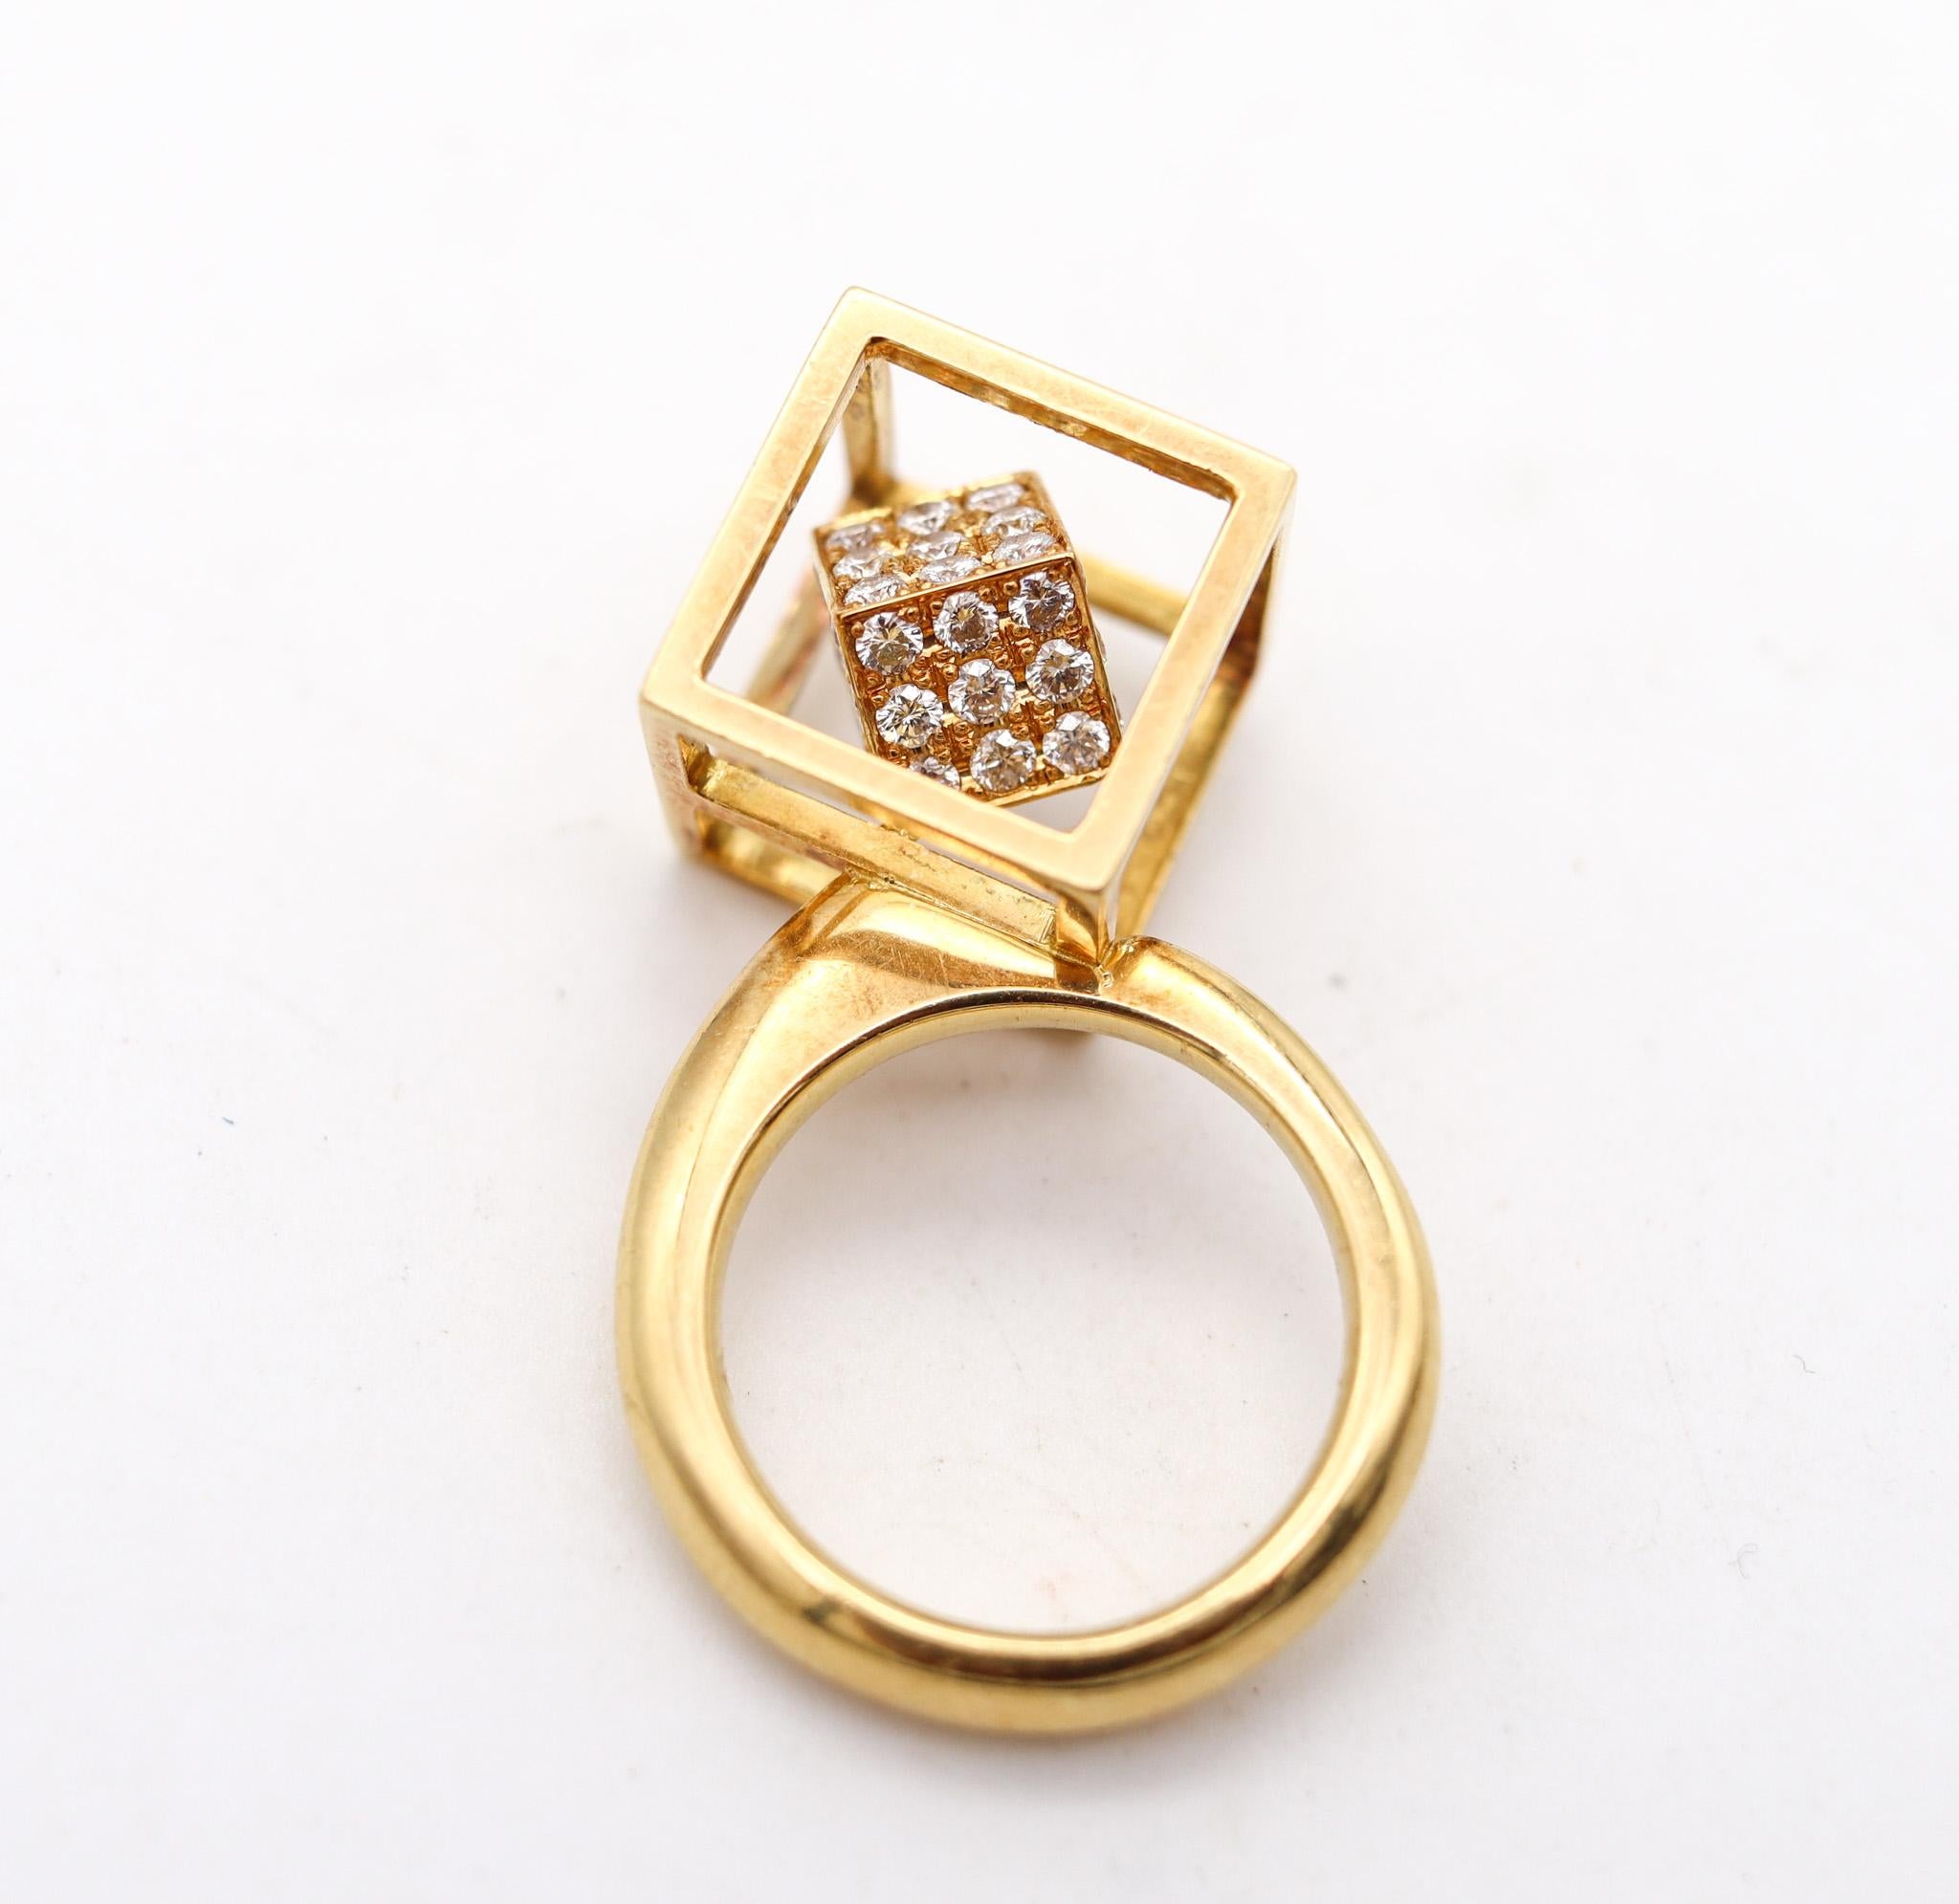 Modernist Sculptural Op Art Ring In 18Kt Yellow Gold With 1.20 Ctw In Diamonds In Excellent Condition For Sale In Miami, FL